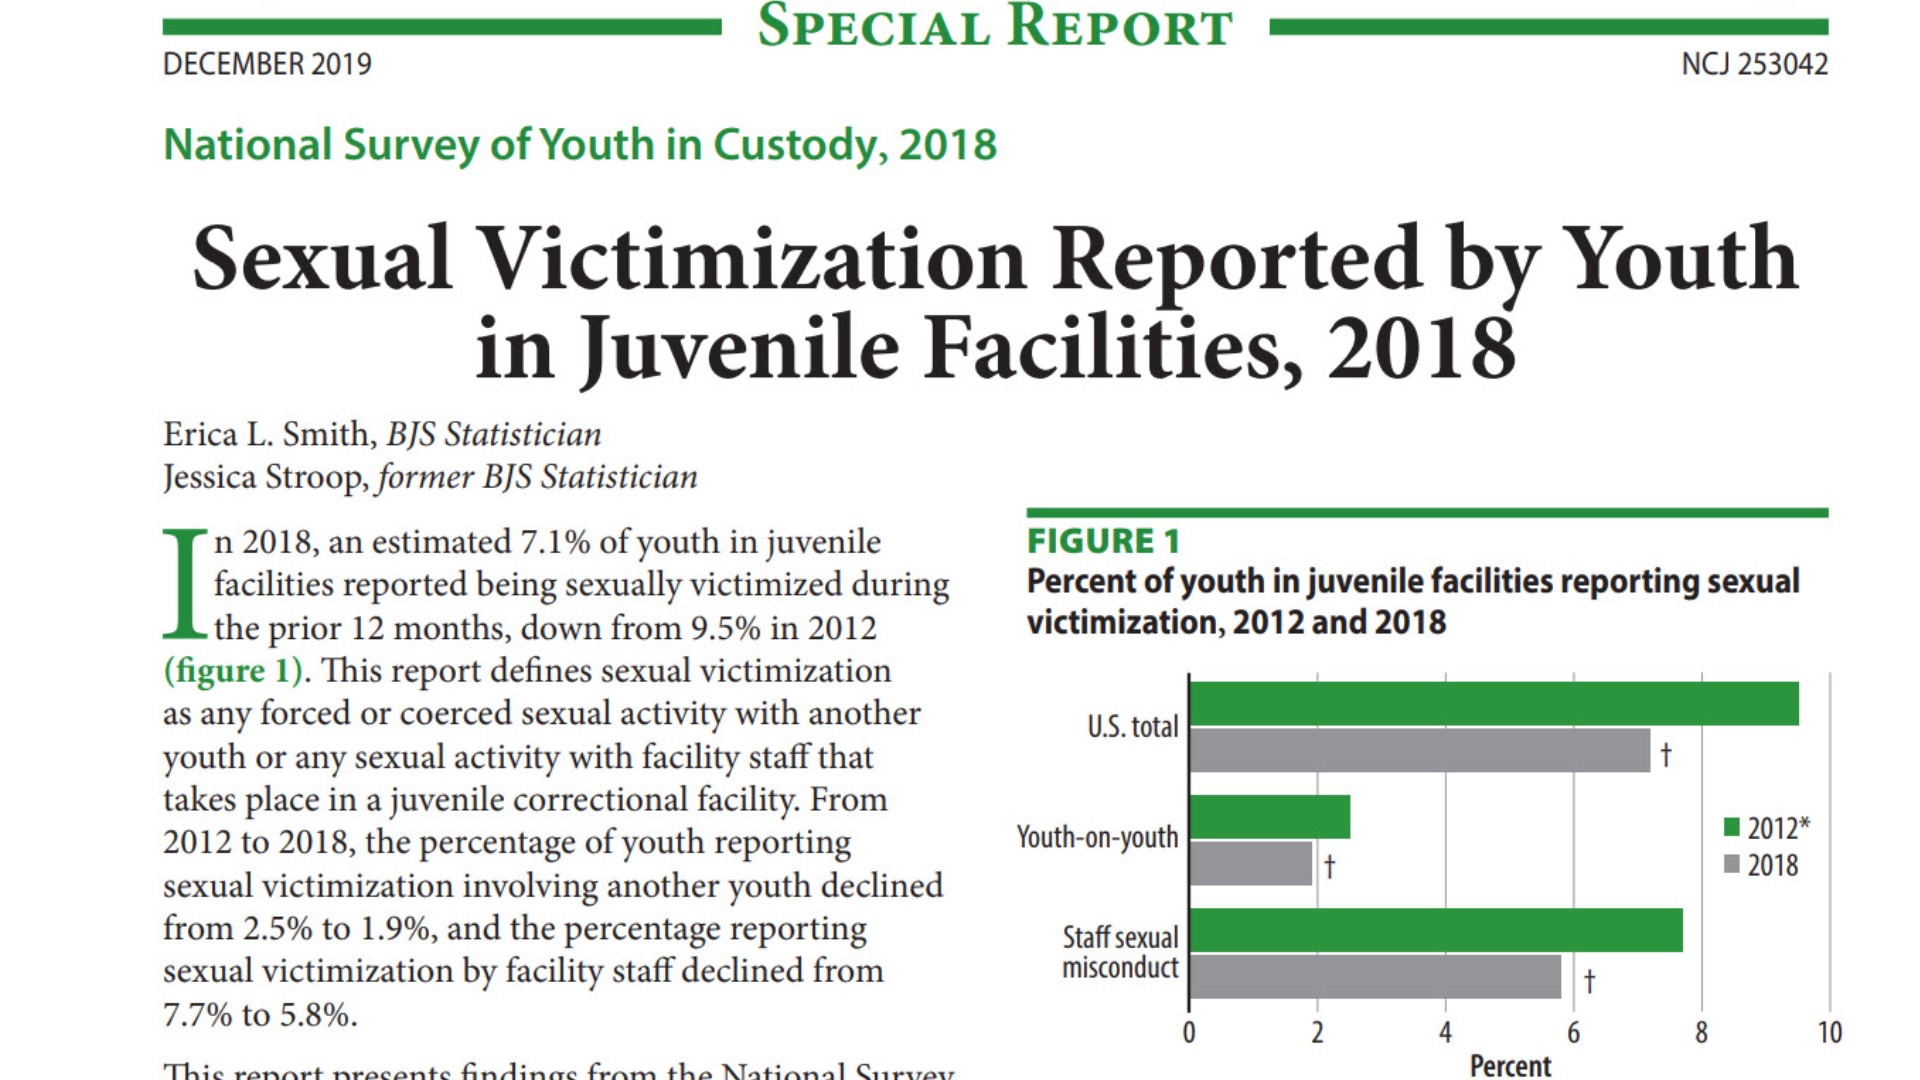 A Department of Justice report found that 15% of youth said they were sexually victimized in Ohio juvenile detention facilities in 2018 - 2nd worst in the nation.